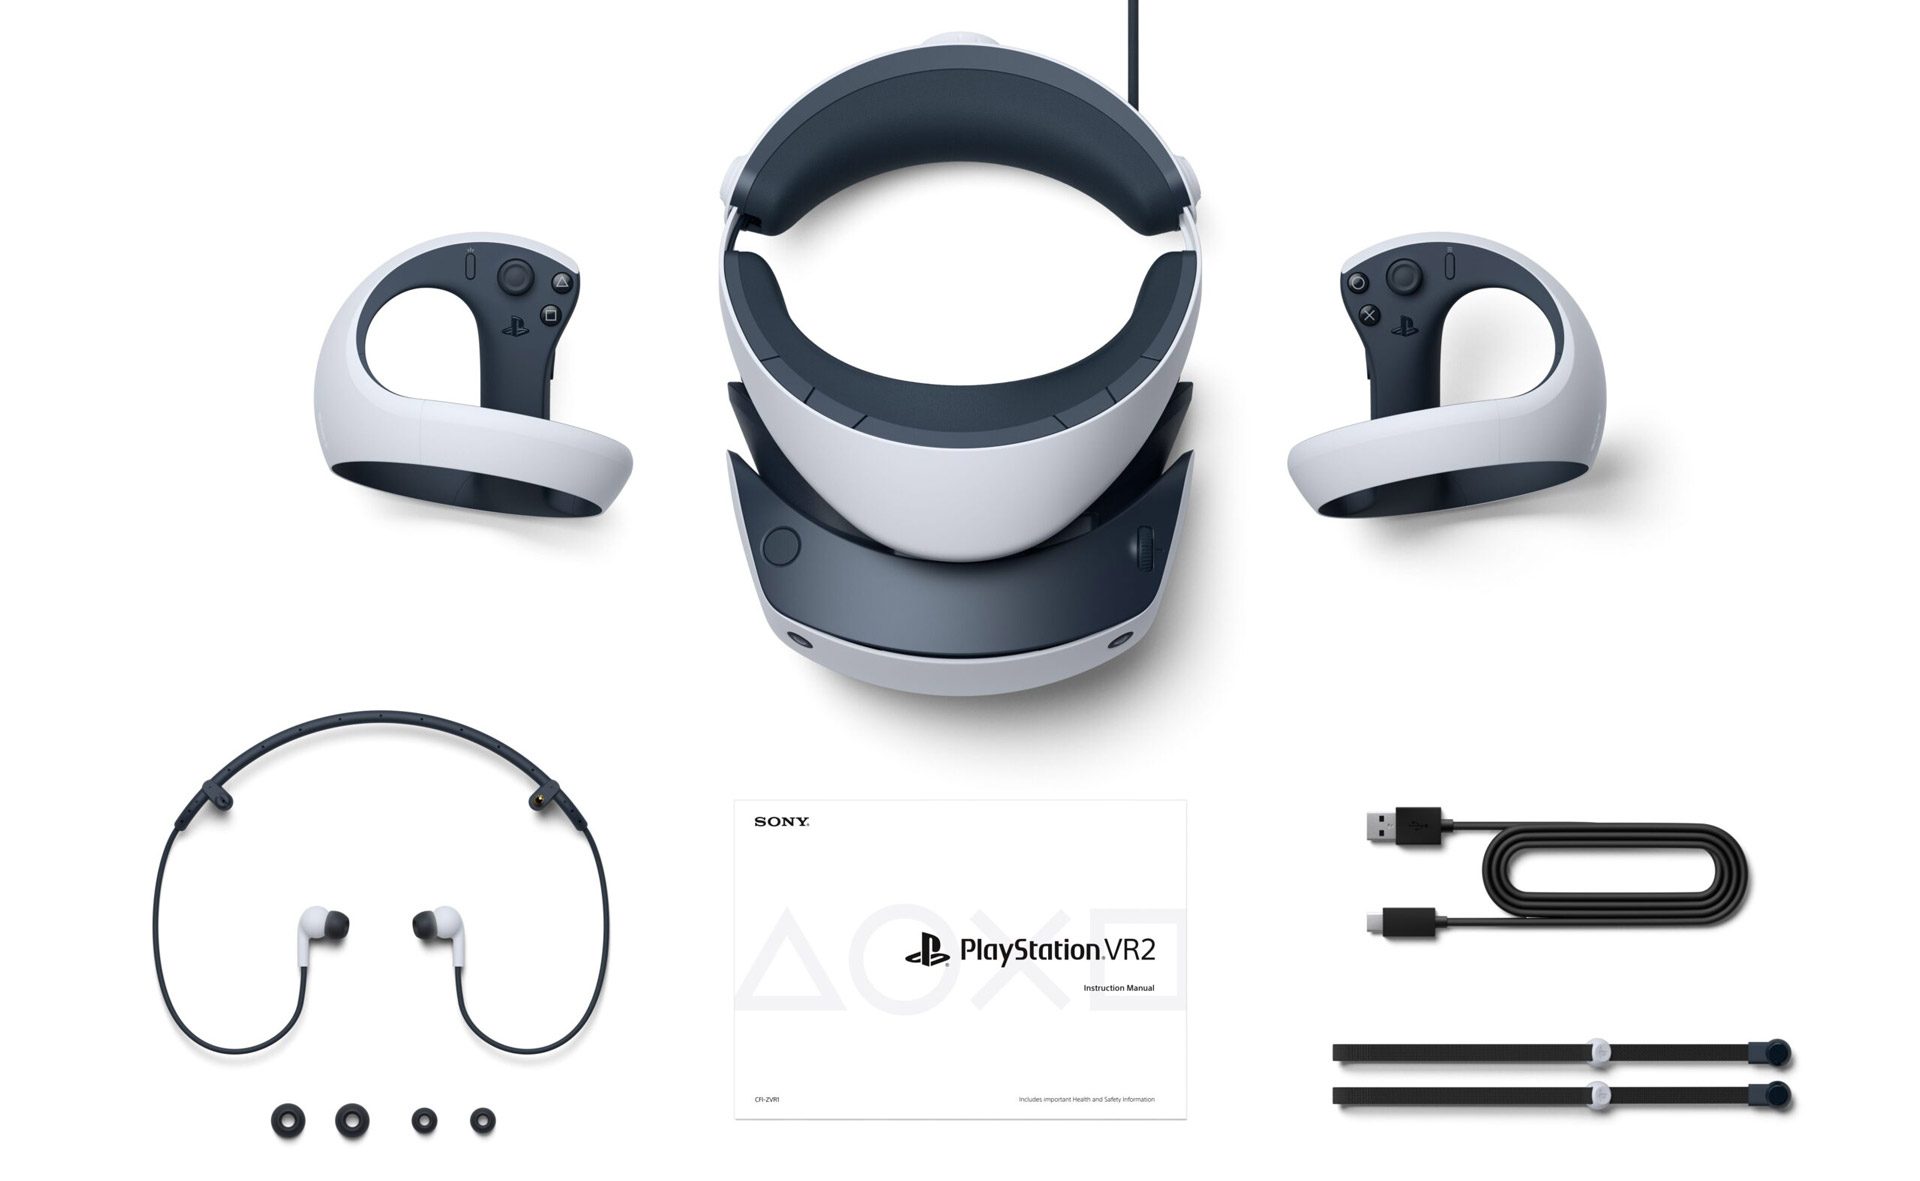 New PlayStation VR2 images and details revealed